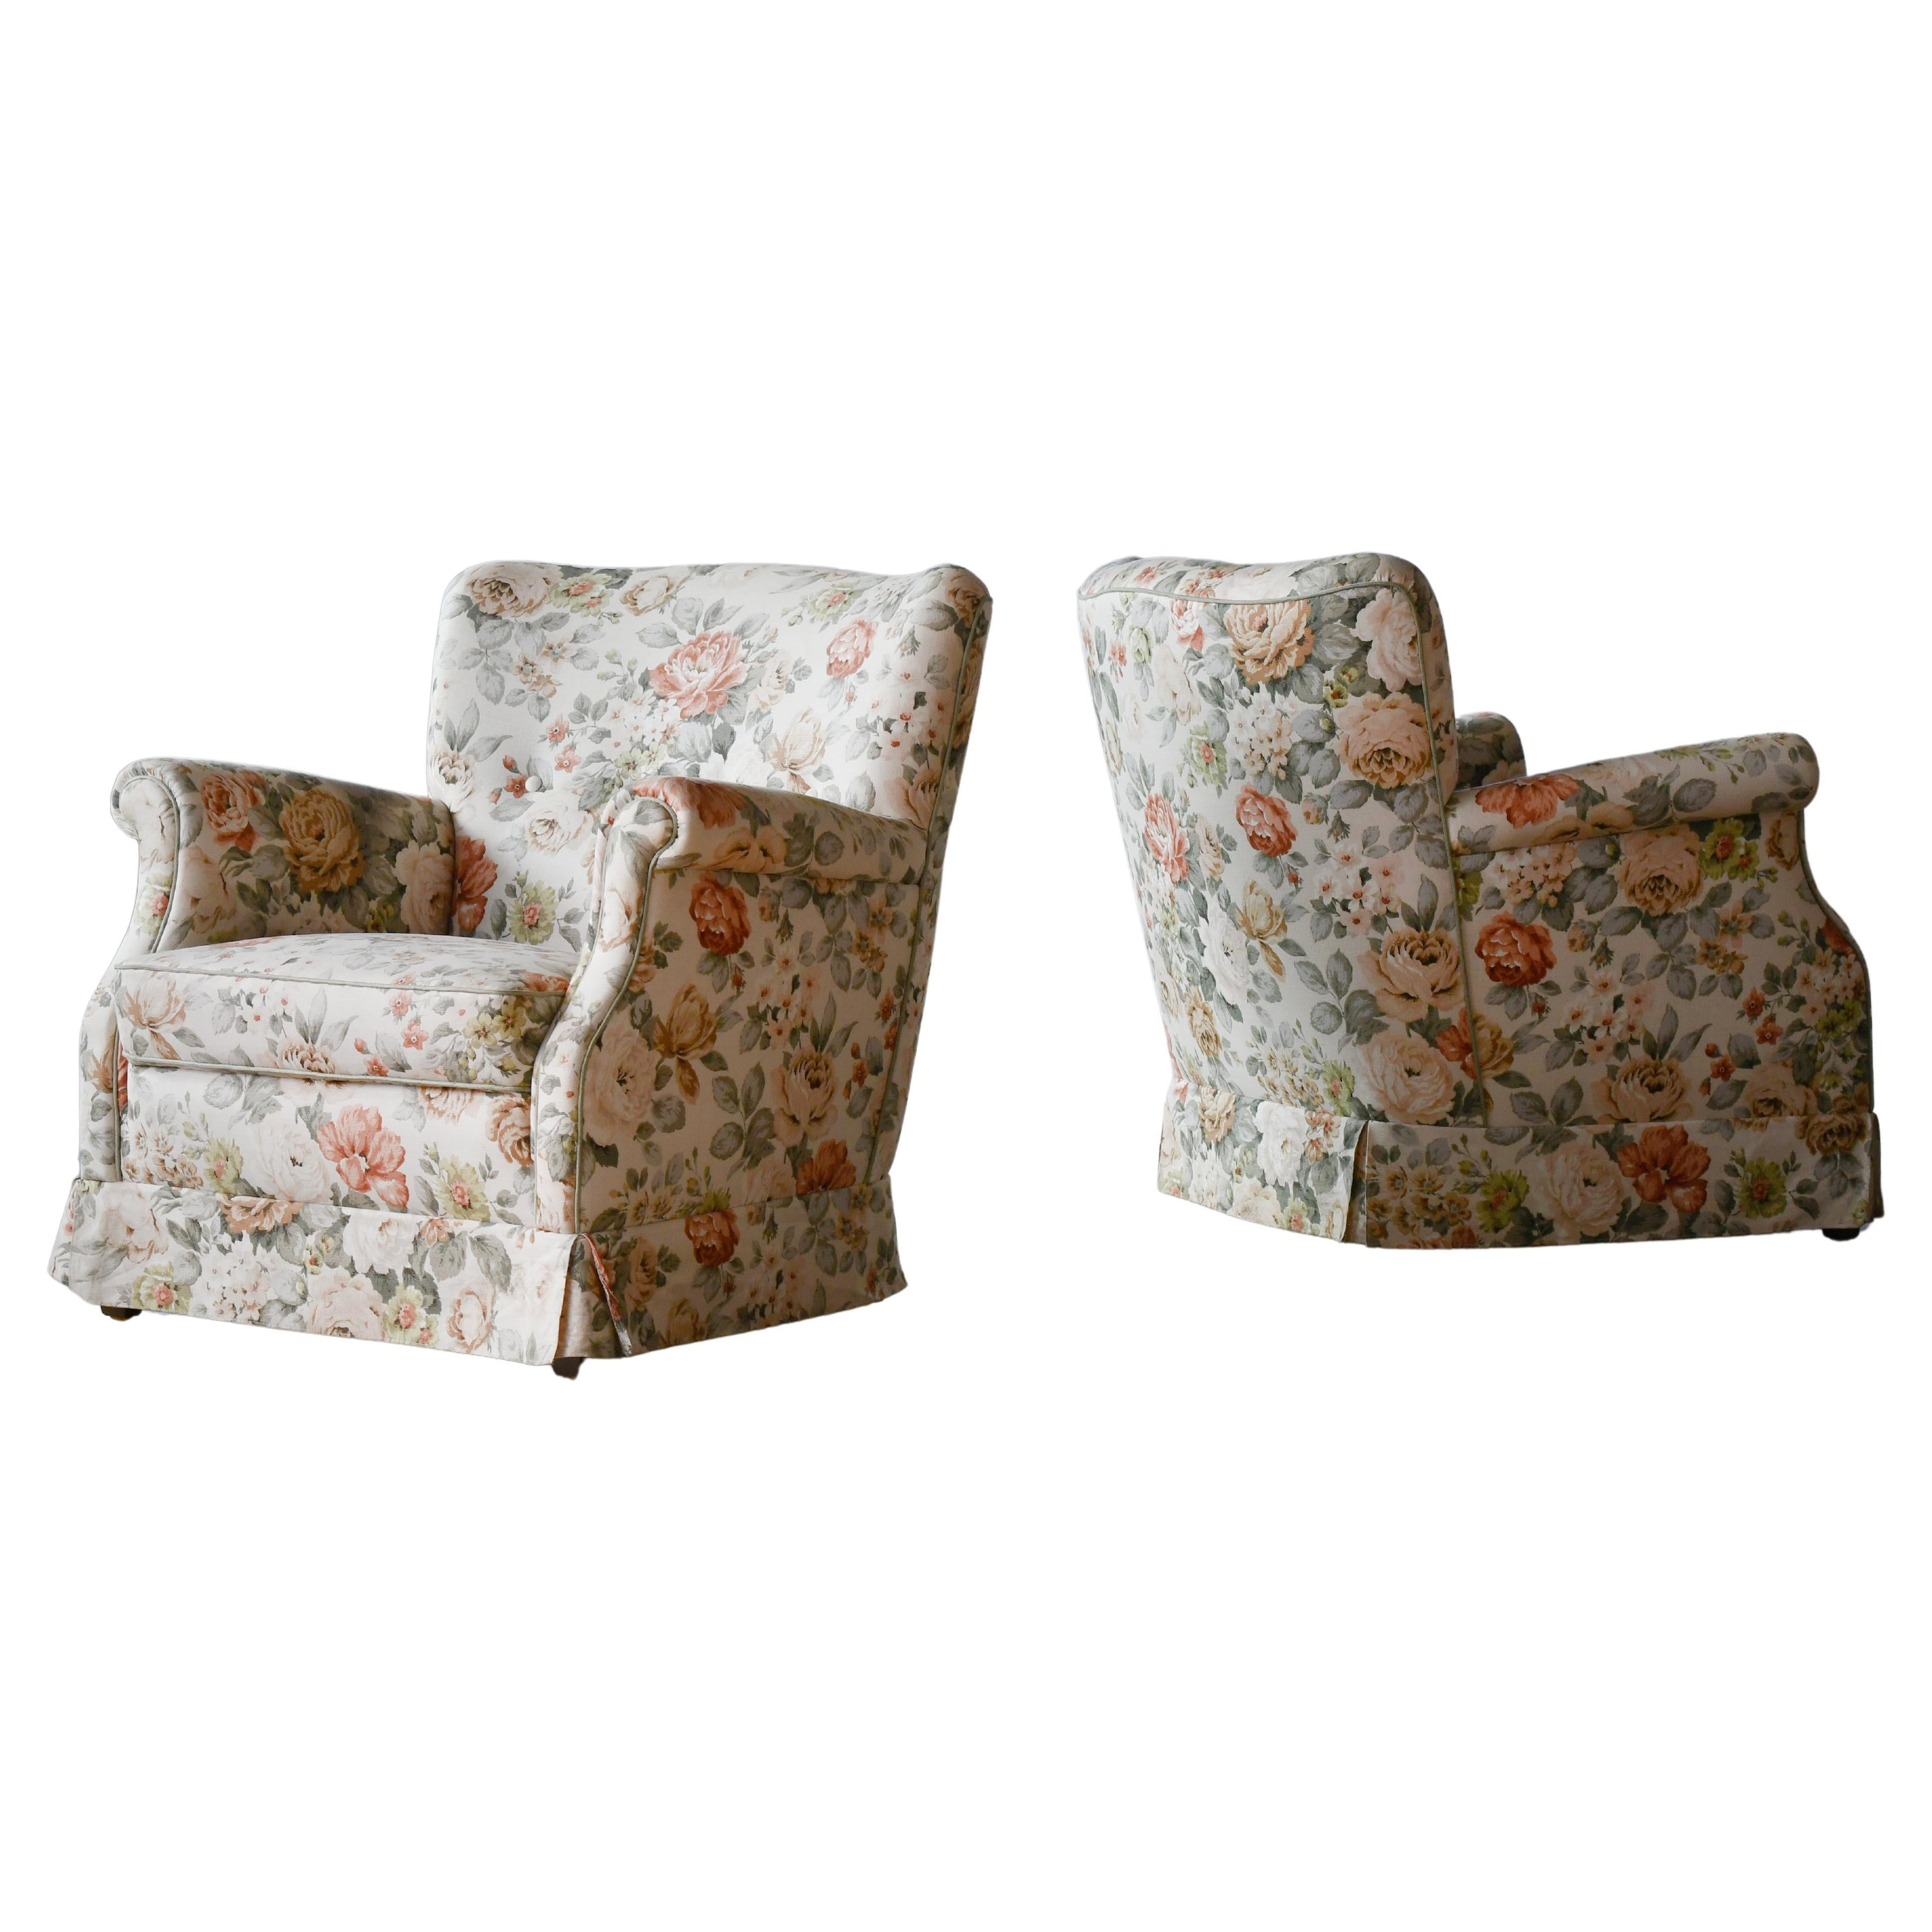 Pair of Danish 1950s Medium Size Lounge Chairs in Floral Fabric and Skirts For Sale